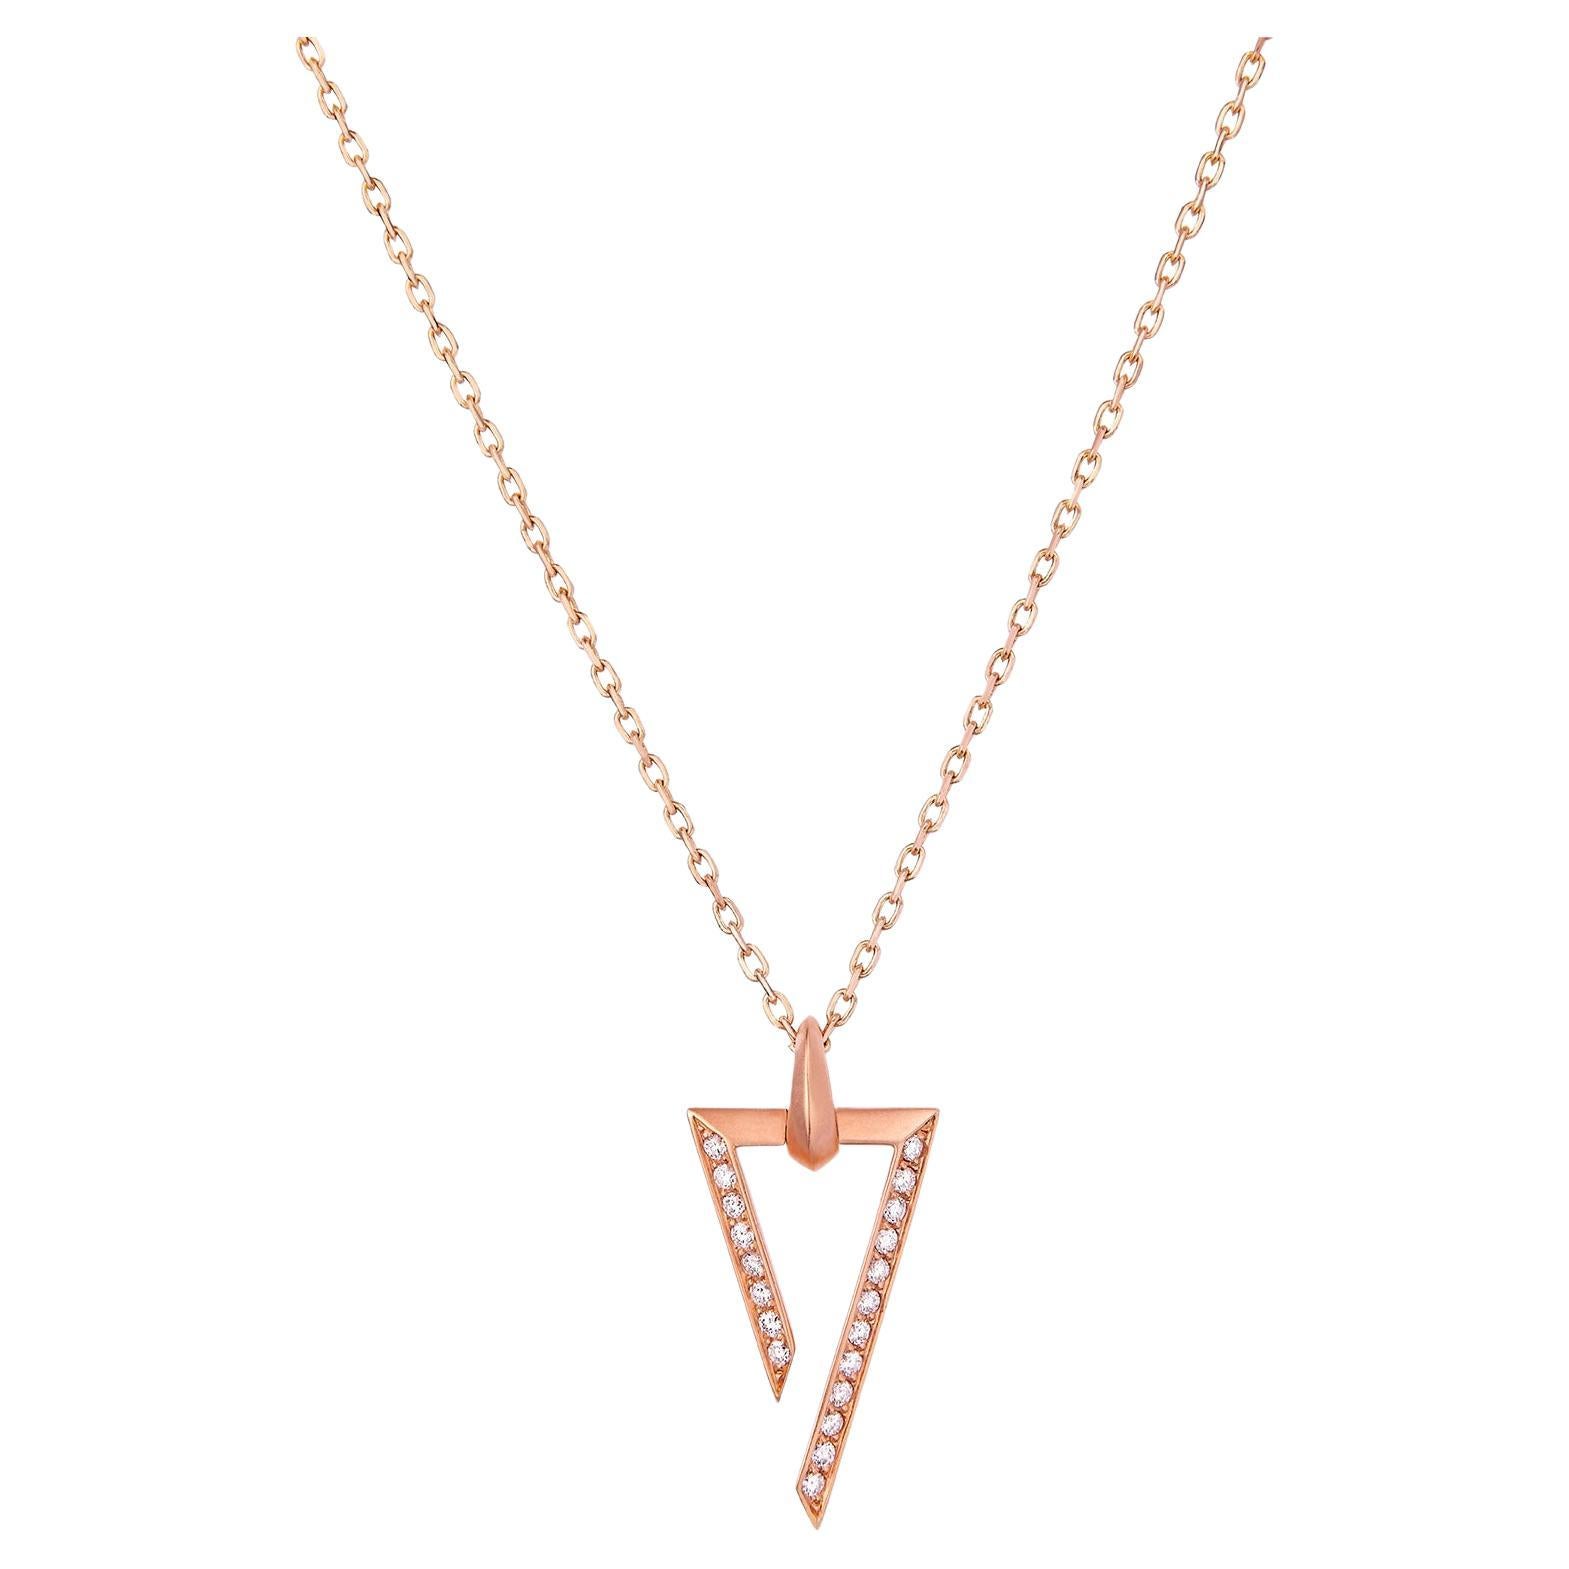 Medium Pendant with Chain Crafted in 18K Rose Gold & White Diamonds 0.31 ct. For Sale